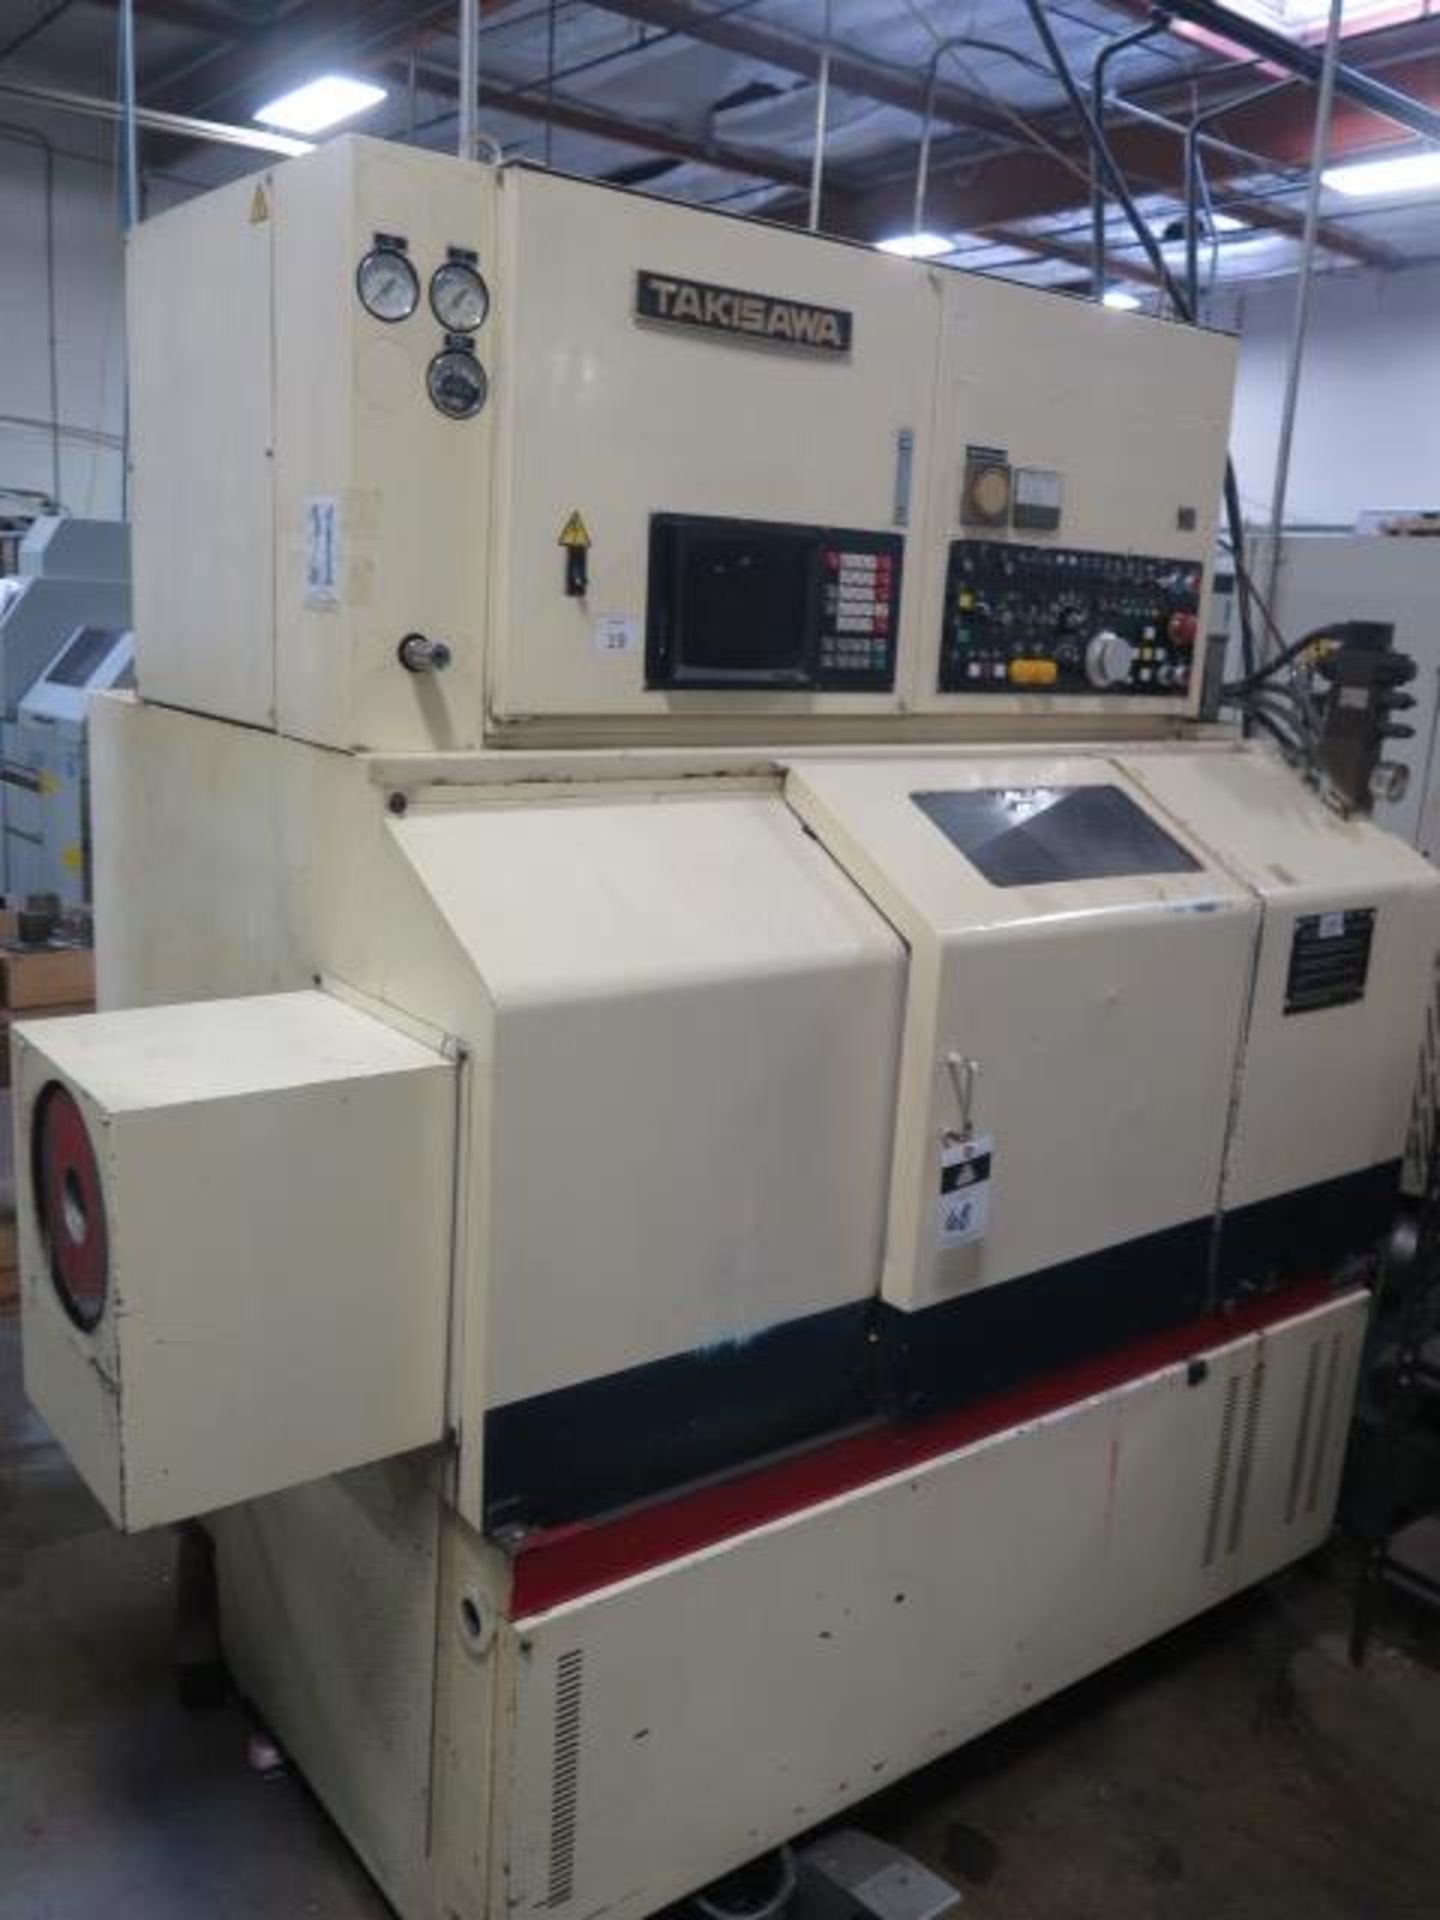 Takisawa TC-2 CNC Turning Center s/n THRDR-4431 w/ Fanuc Controls, 6-Station Turret, SOLD AS IS - Image 2 of 16